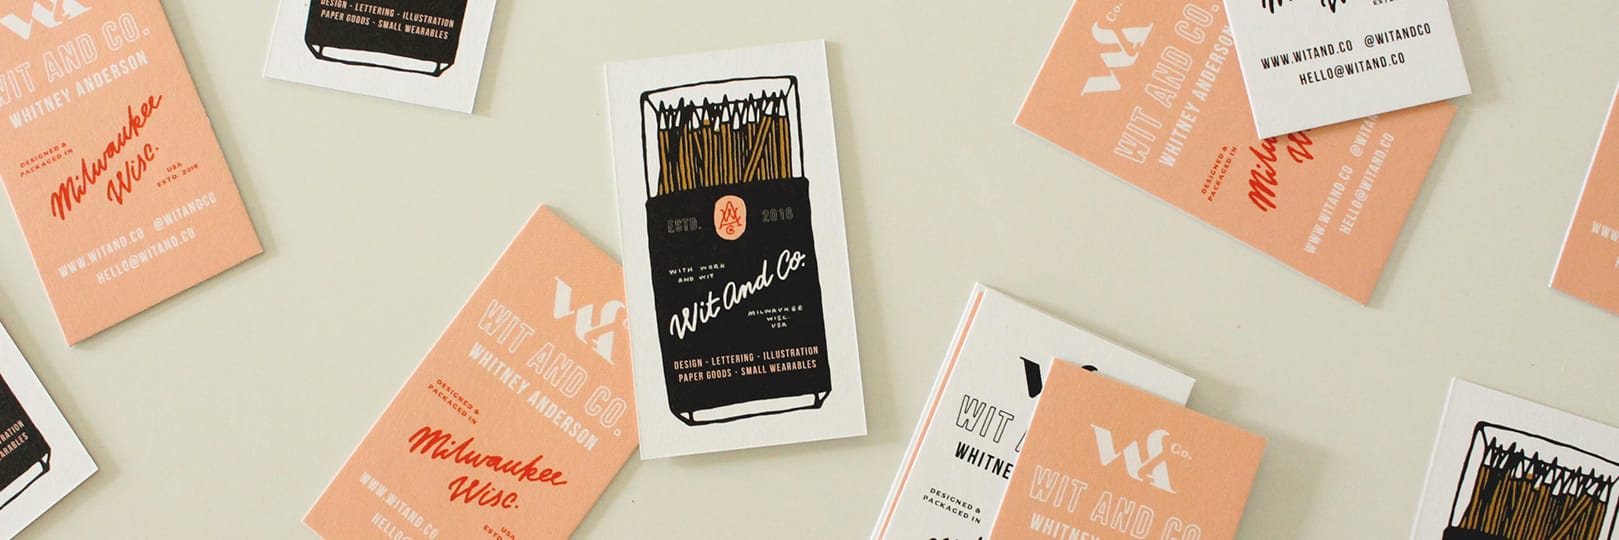 These Business Cards are just our type - MOO Blog